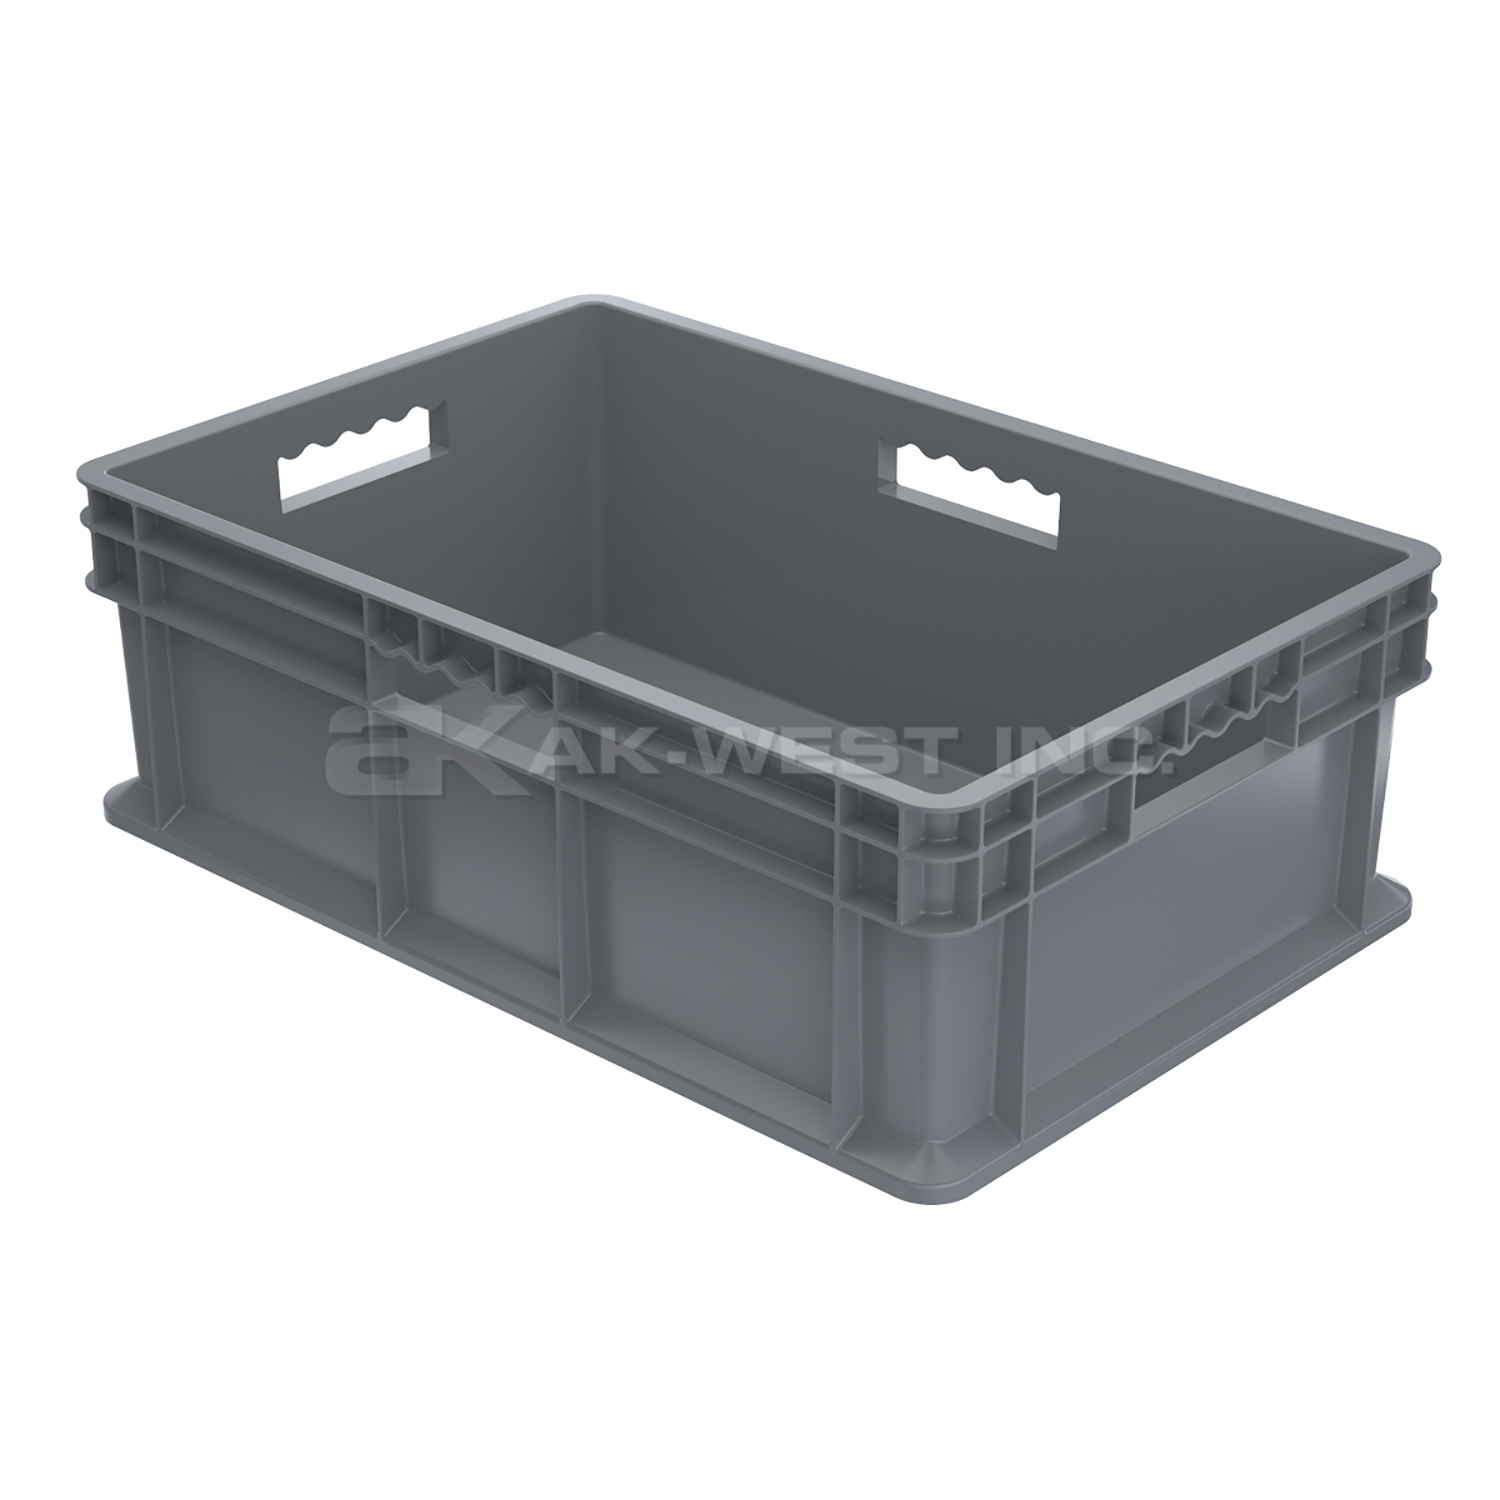 Grey, 23-3/4" x 15-3/4" x 8-1/4", Solid Side and Base, Straight Wall Container (4 Per Carton)